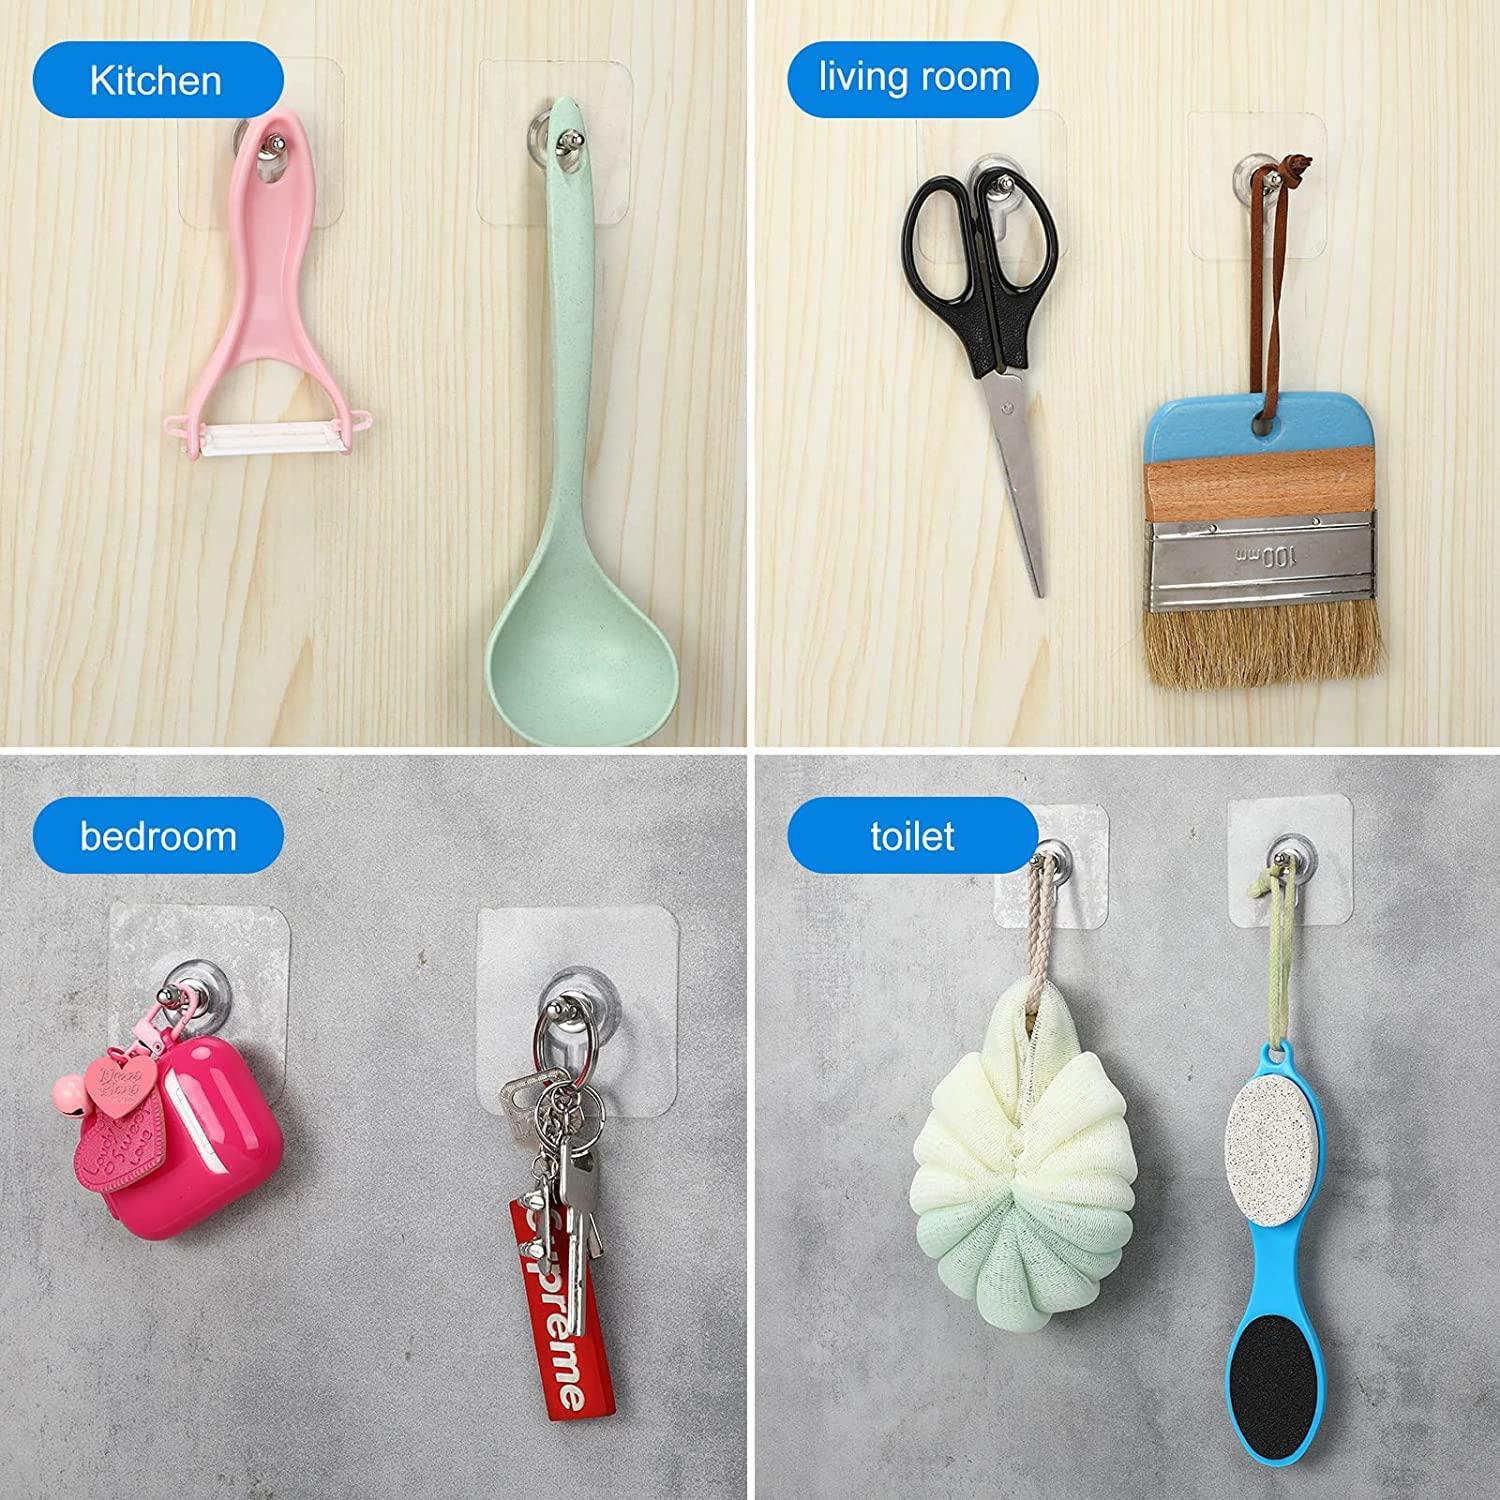 Wall Hooks, Adhesive Wall Screws Hanging Nails, No-Drilling Waterproof Screw Free Stickers for Hanging, Heavy-Duty Adhesive Wall Mount Screw Hooks for Kitchen Bathroom Bedroom Living Room 10 Pcs - Premium Home Essentials from Deal IND. - Just Rs. 399! Shop now at Deal IND.